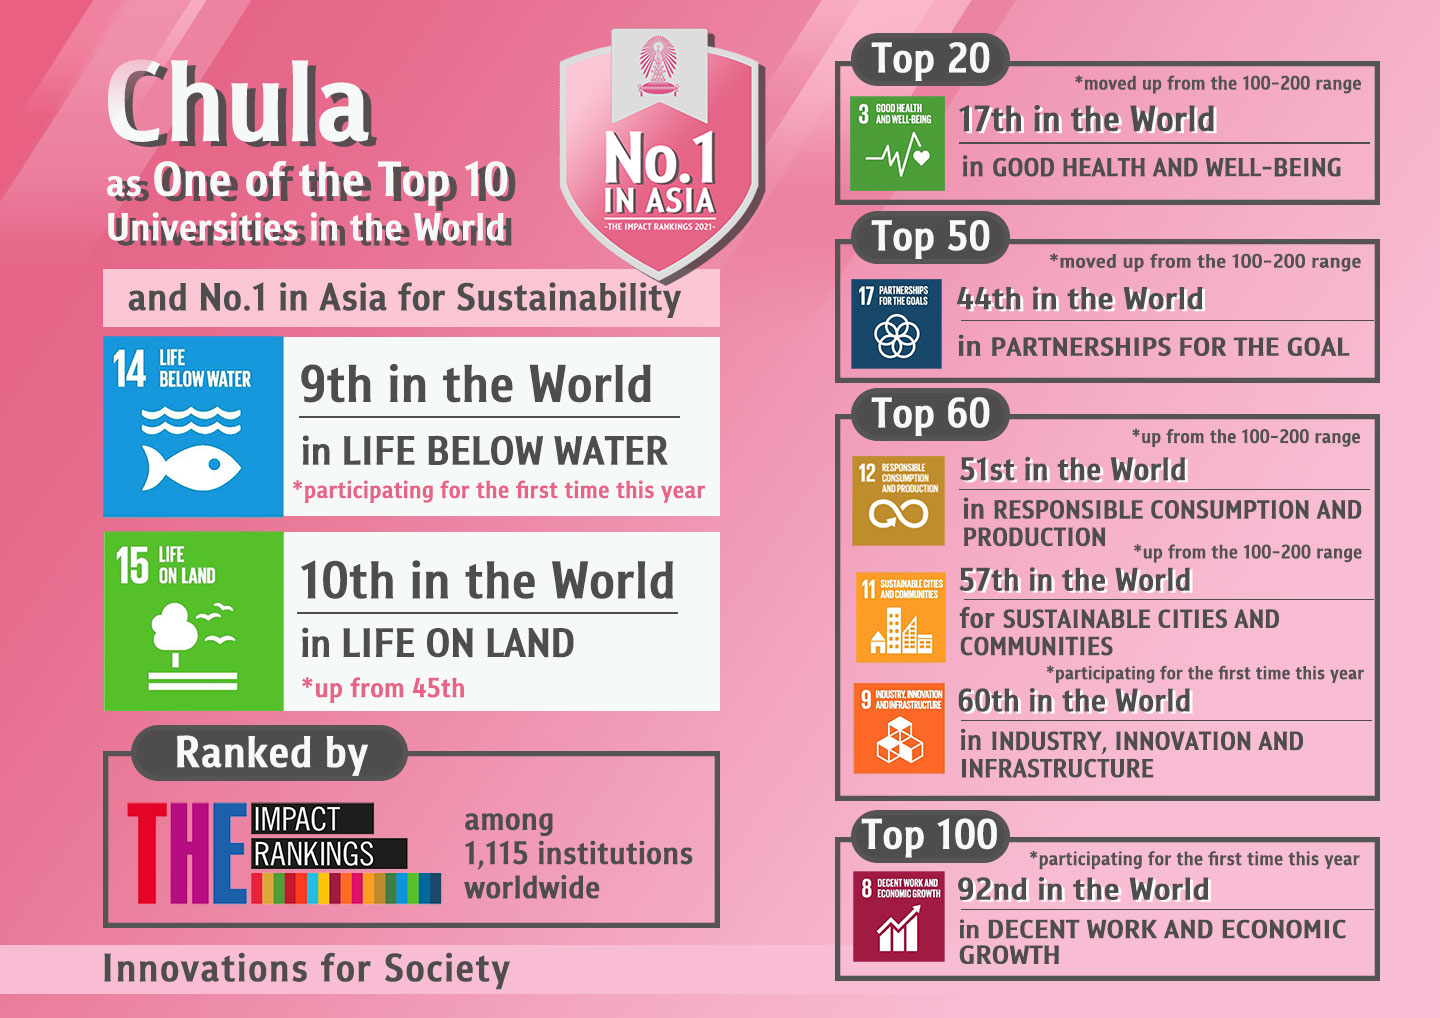 Chula as One of the Top 10 Universities in the World